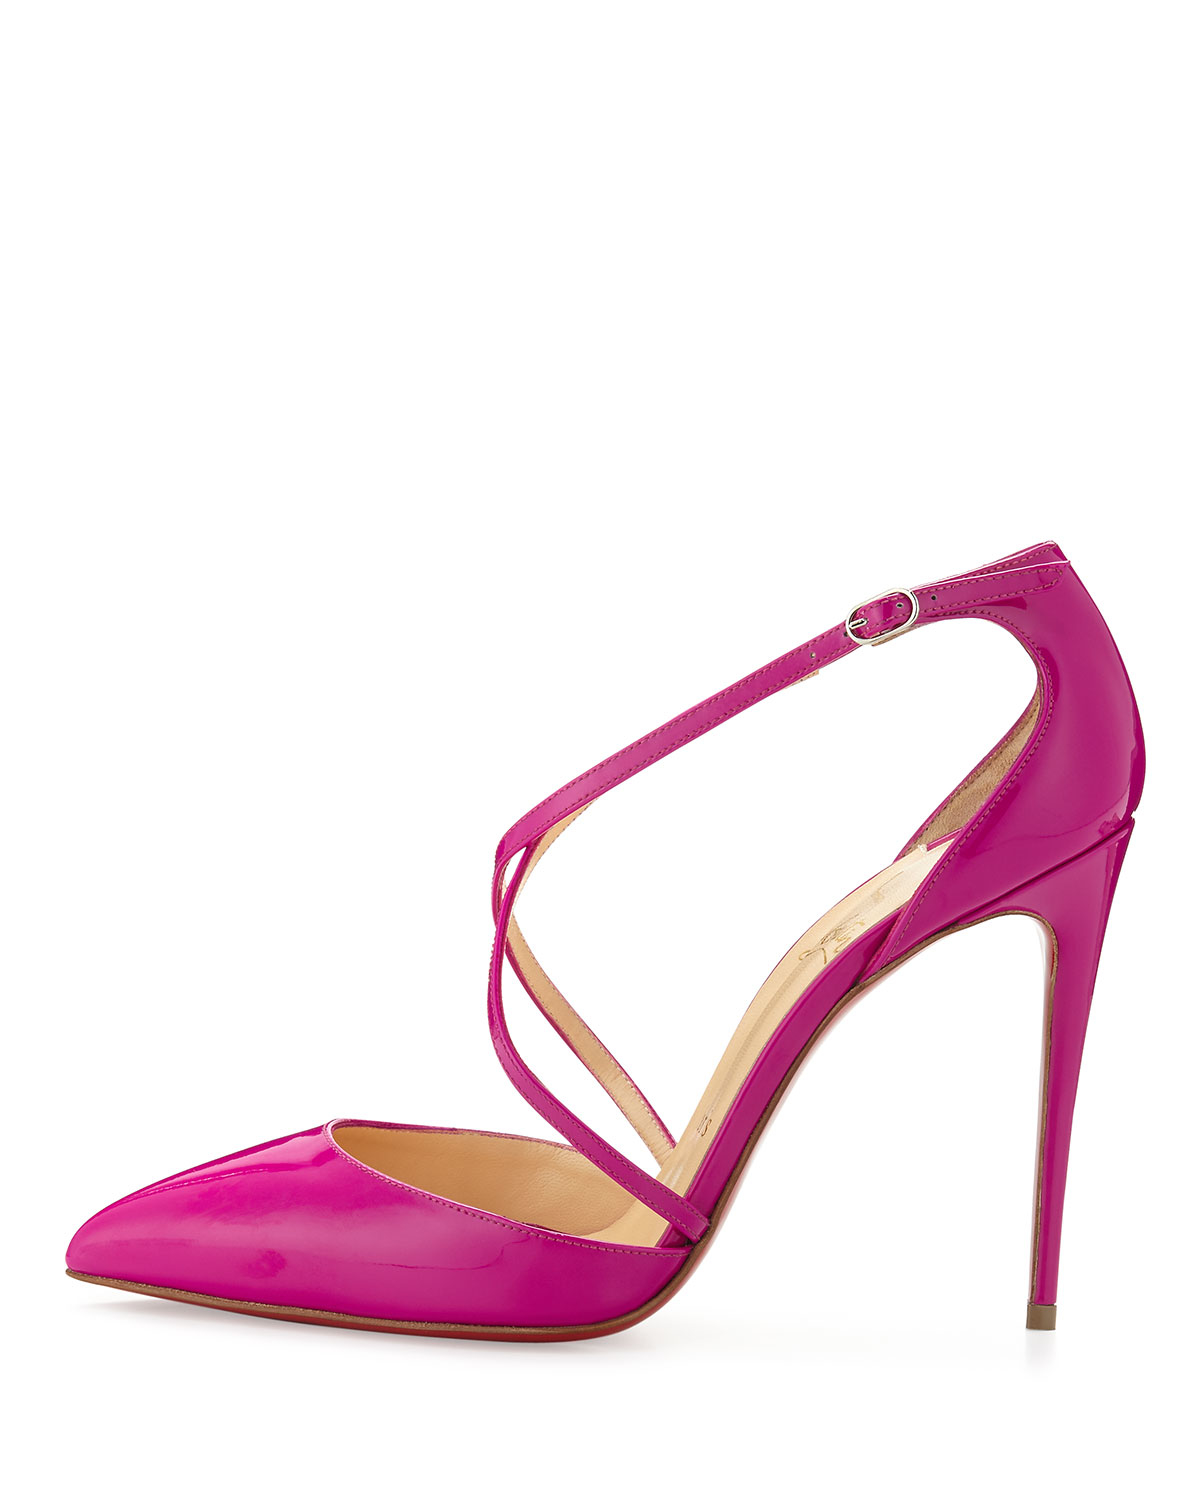 Christian louboutin Blake Crossover Patent Leather Pumps in Pink ...